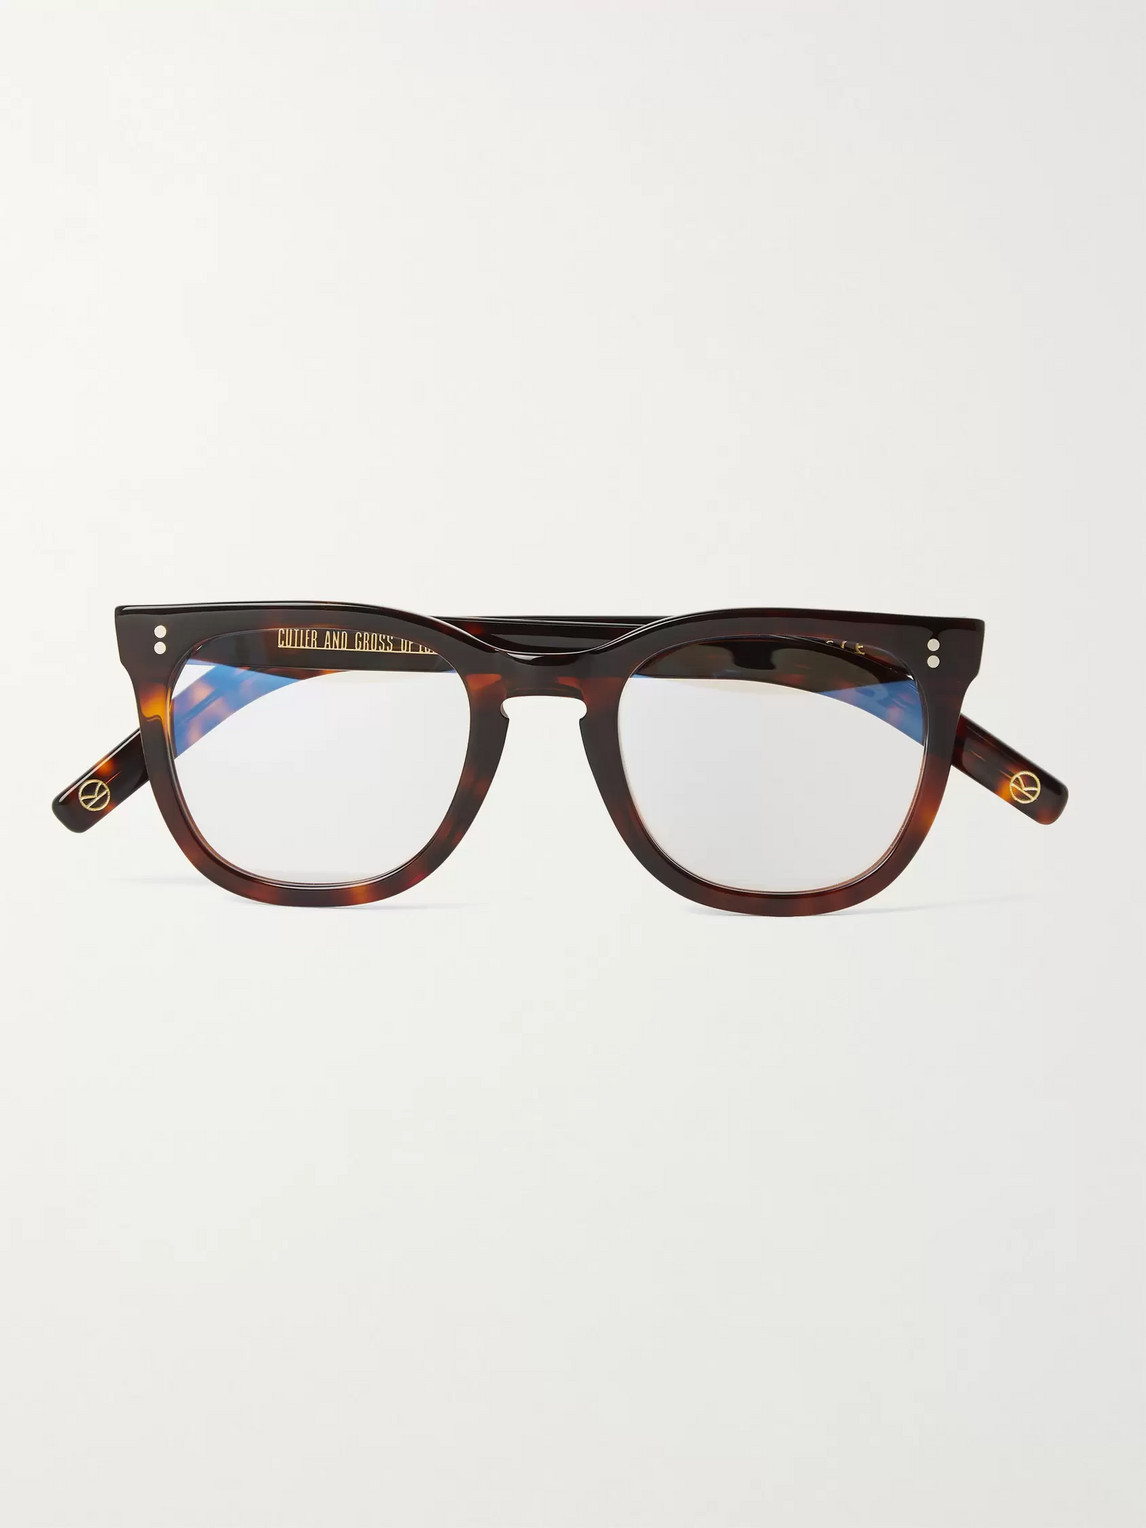 Kingsman Cutler And Gross D-frame Acetate Optical Glasses In Brown